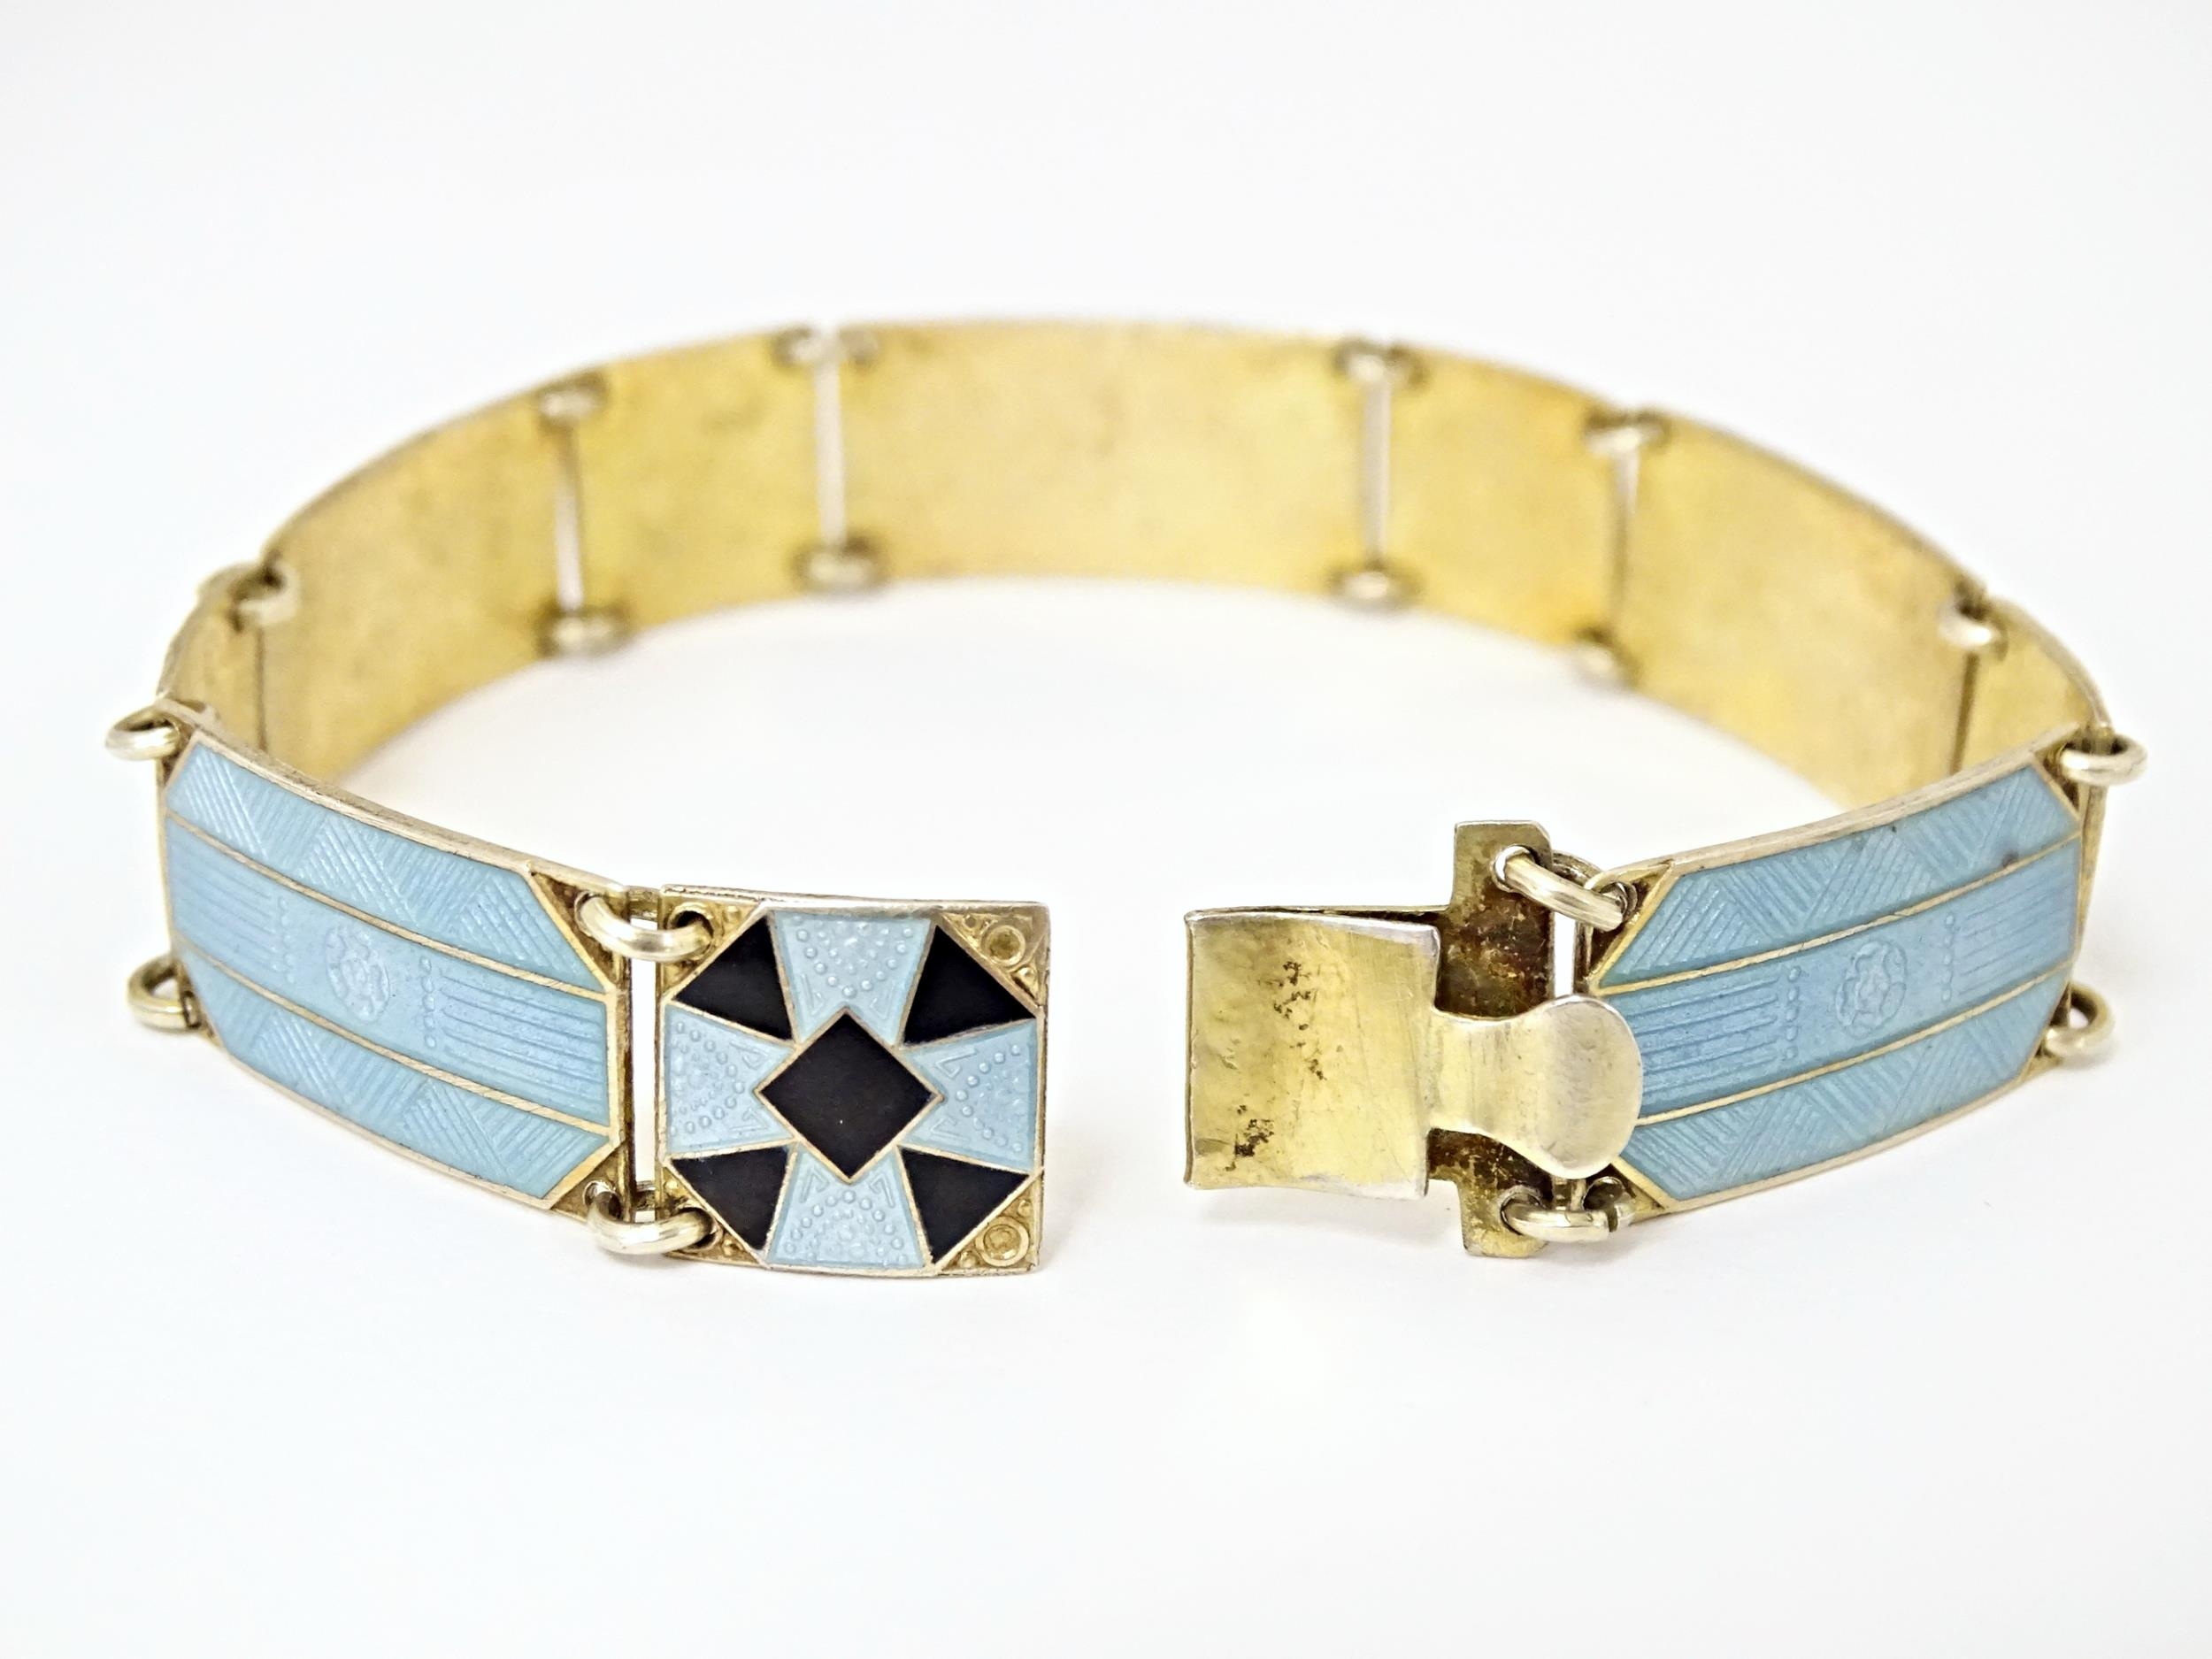 Scandinavian jewellery: A Swedish silver gilt bracelet with pale blue and black guilloche enamel - Image 7 of 7